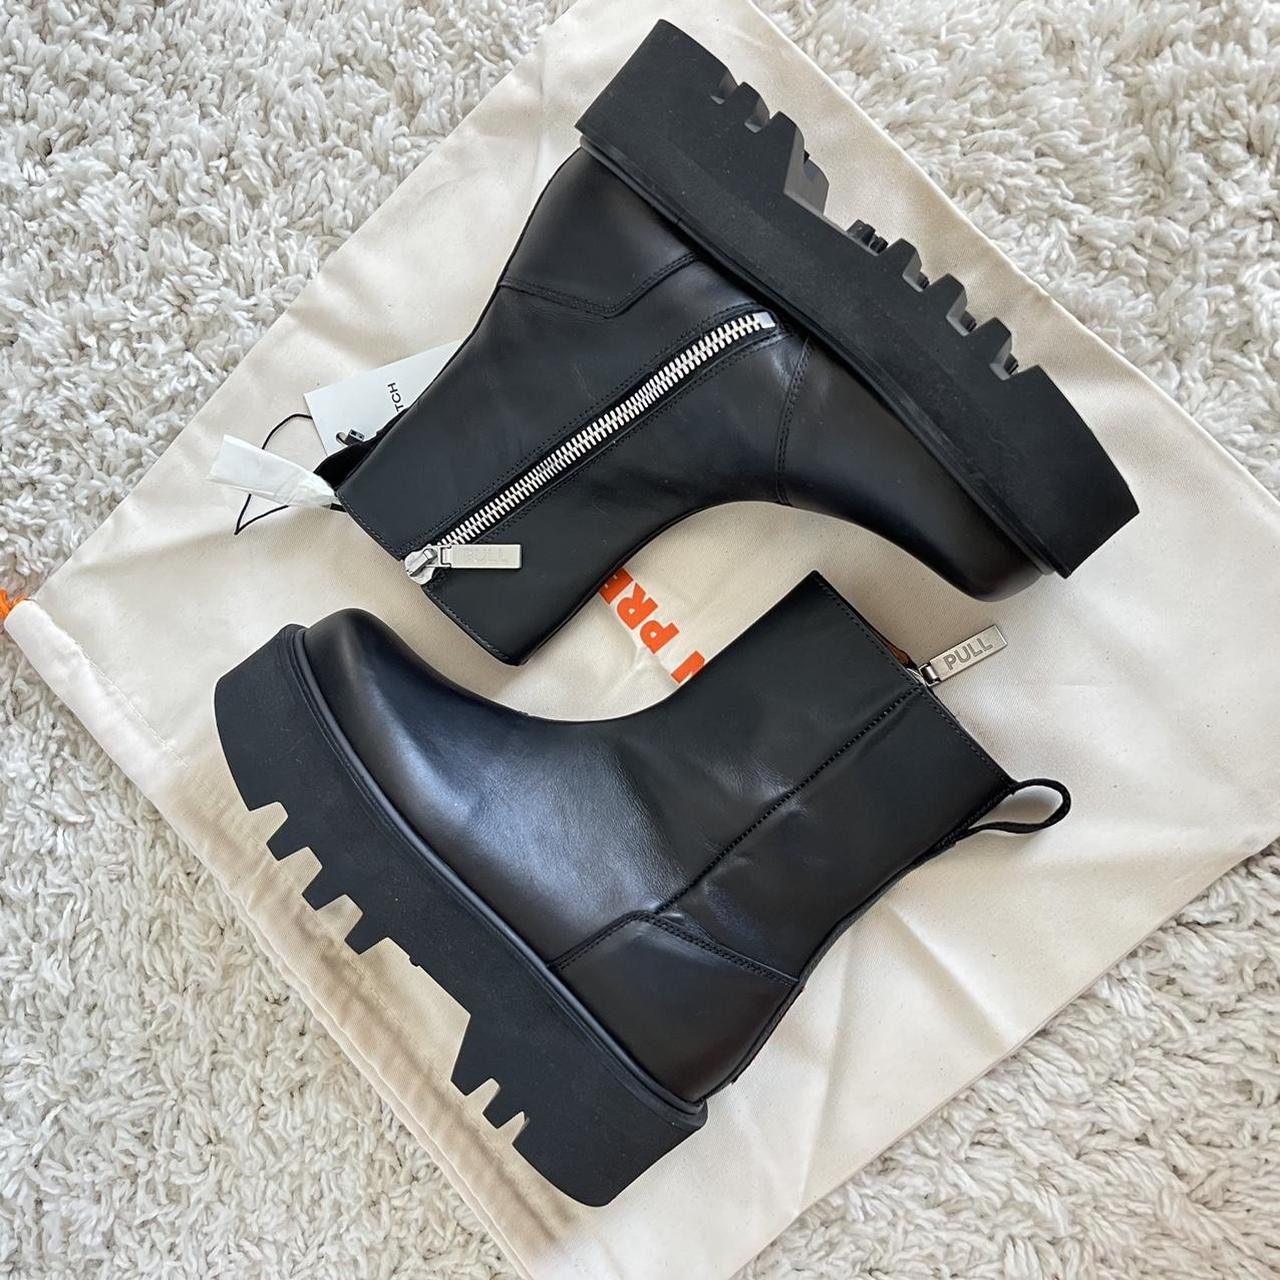 Product Image 1 - Heron Preston ankle boots
100% leather
Tried